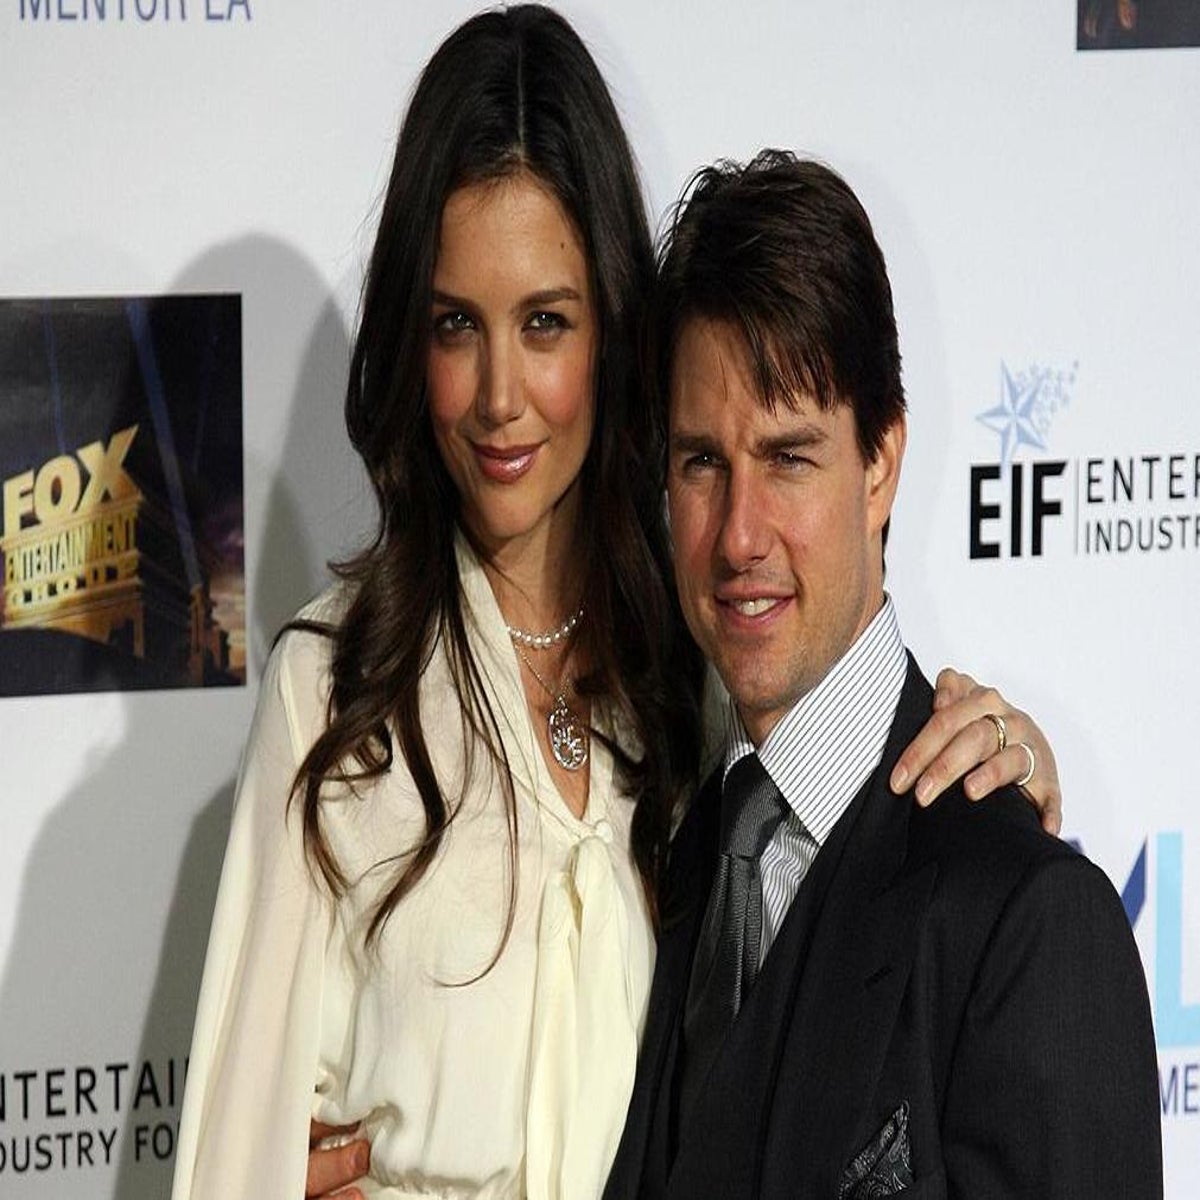 https://static.independent.co.uk/s3fs-public/thumbnails/image/2017/09/08/12/tom-cruise-katie-holmes-short-man.jpg?width=1200&height=1200&fit=crop